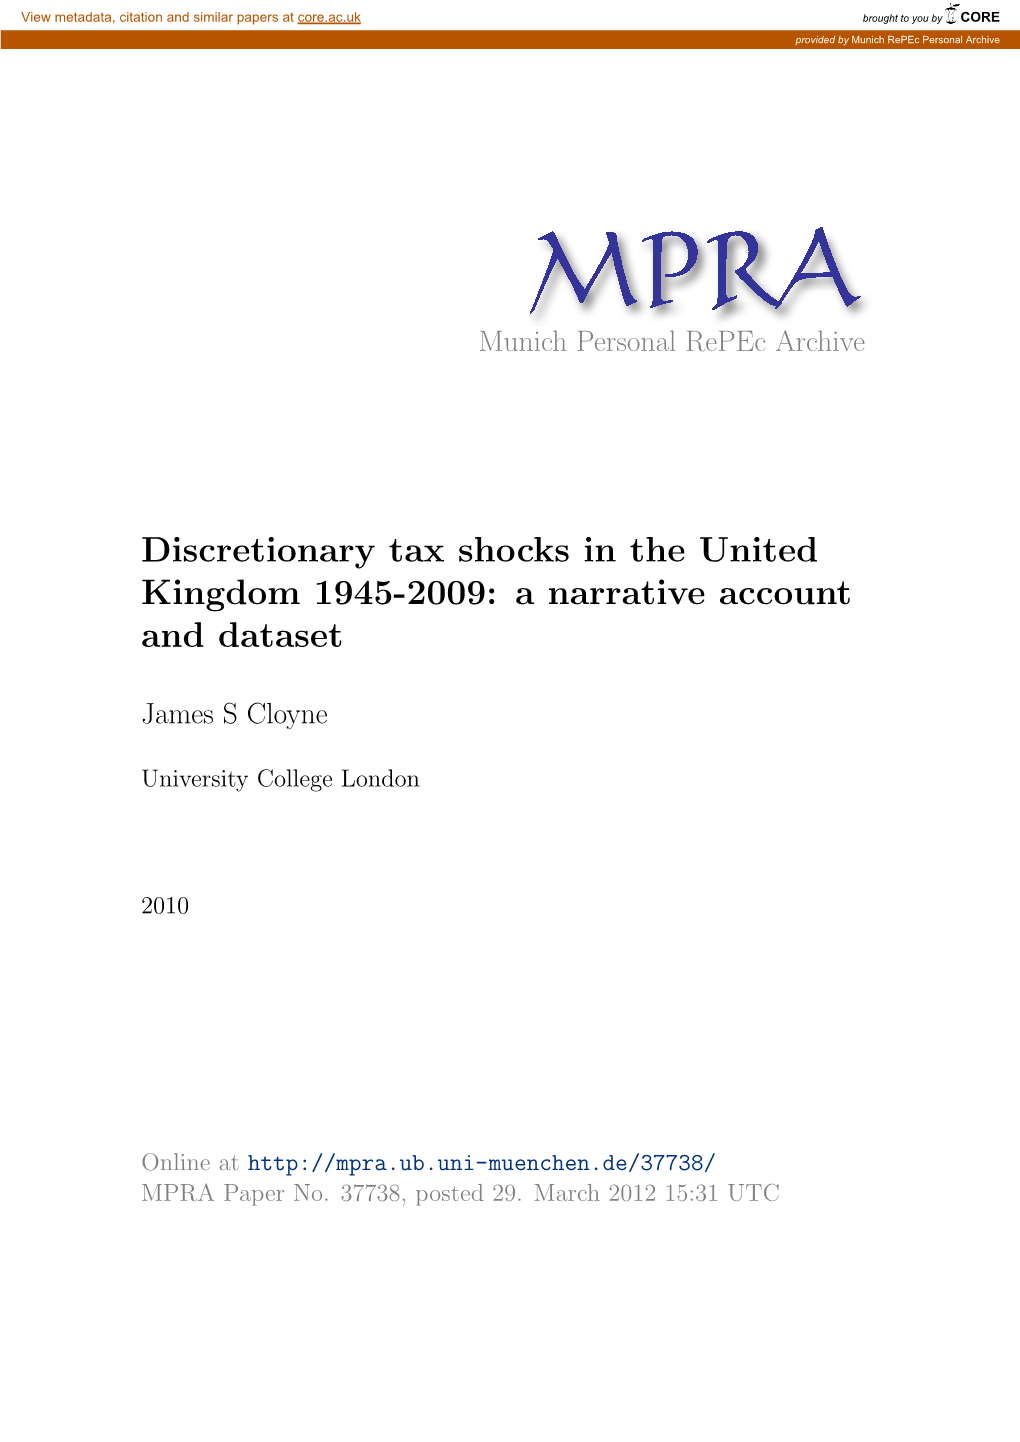 Discretionary Tax Shocks in the United Kingdom 1945-2009: a Narrative Account and Dataset